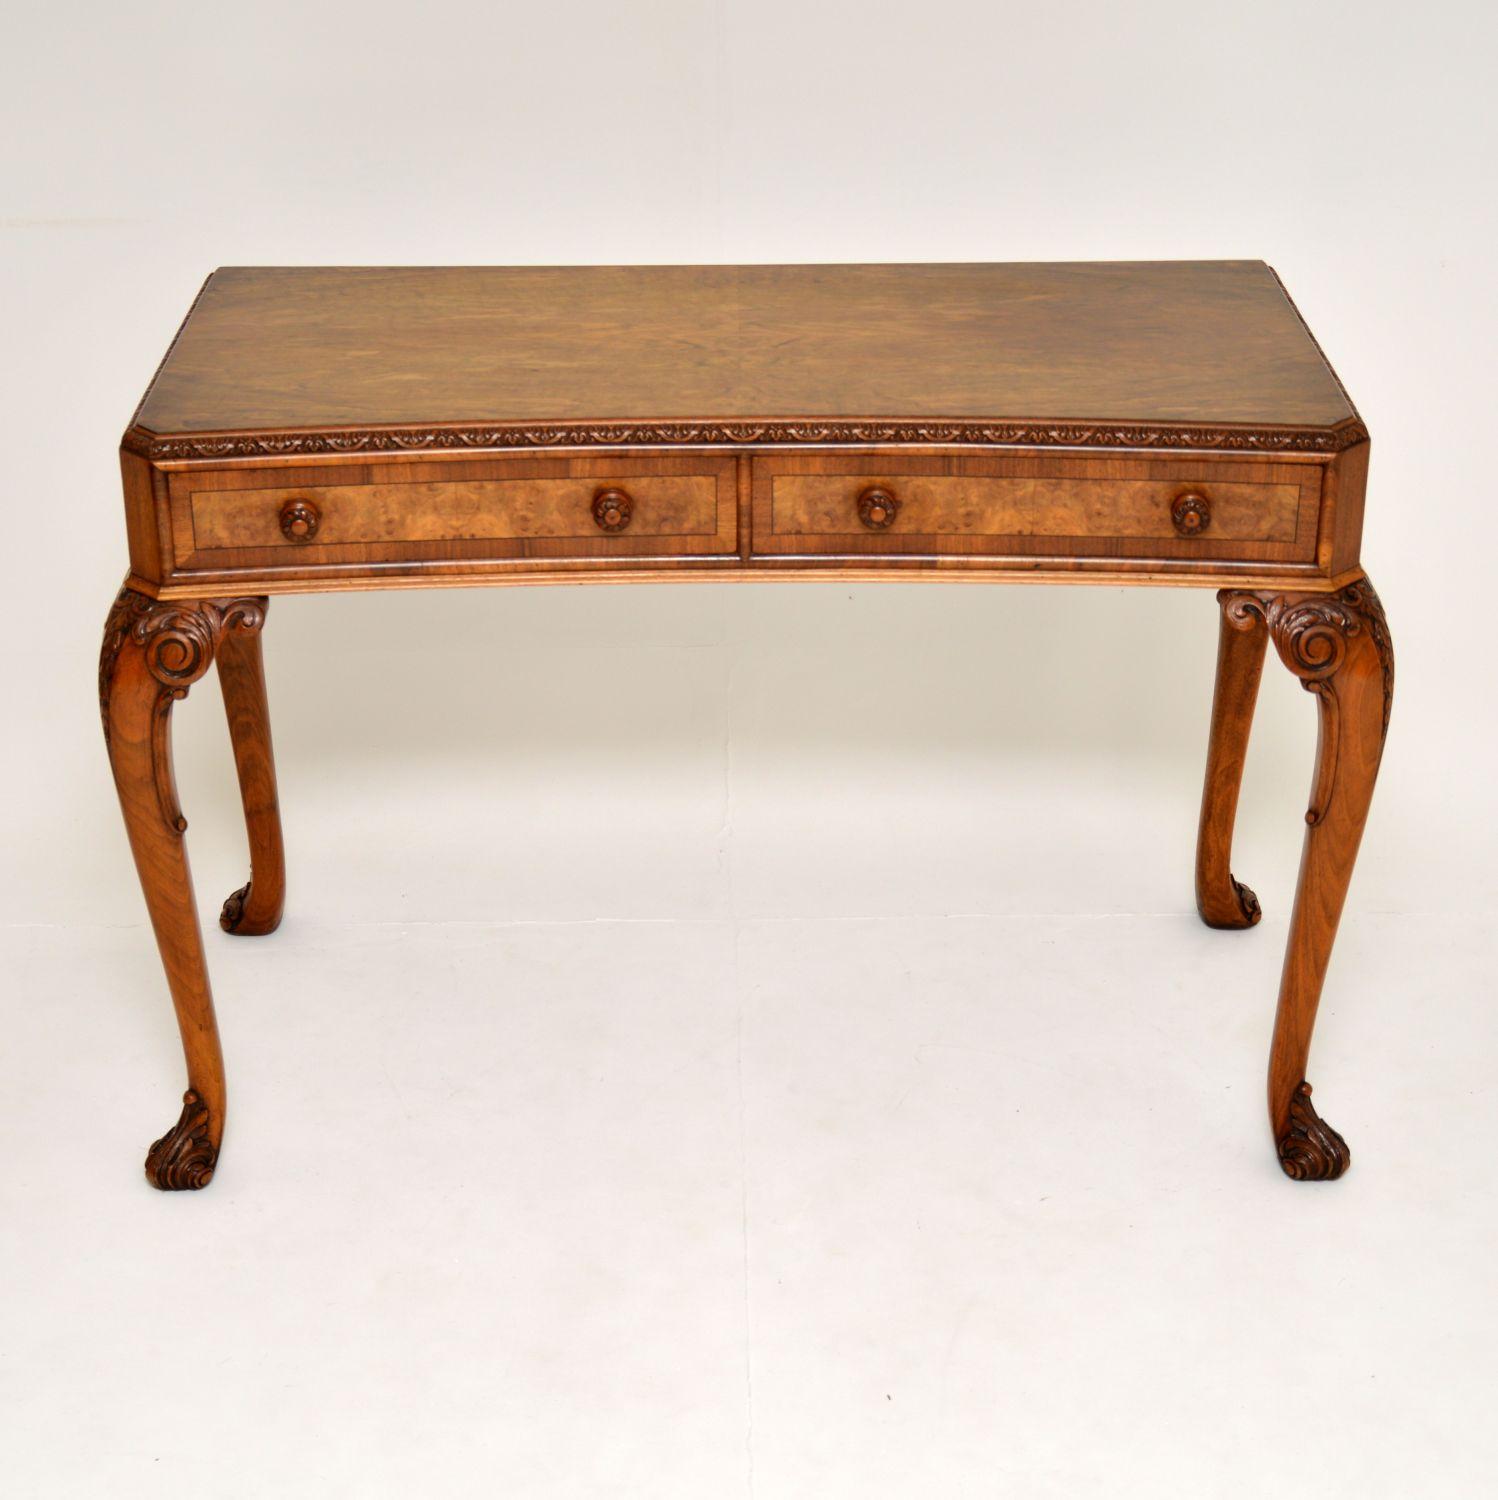 A stunning antique side table of superb quality, with a concave shaped front and canted corners, beautifully made from solid and burr walnut. This dates from circa 1900-1920 period.

It is large and so well made, with fine quality and very deep